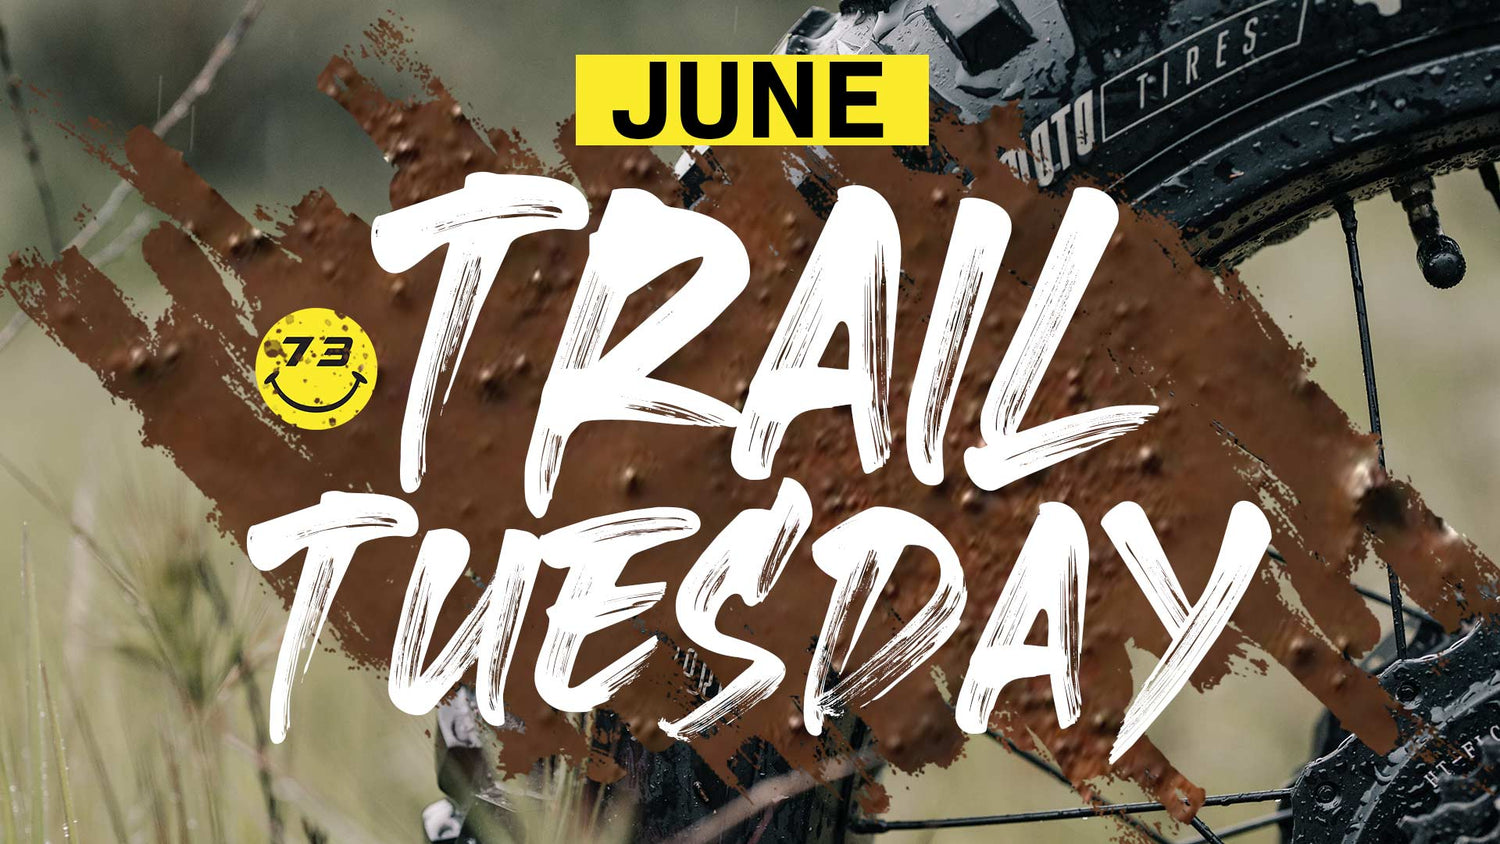 June trail tuesday